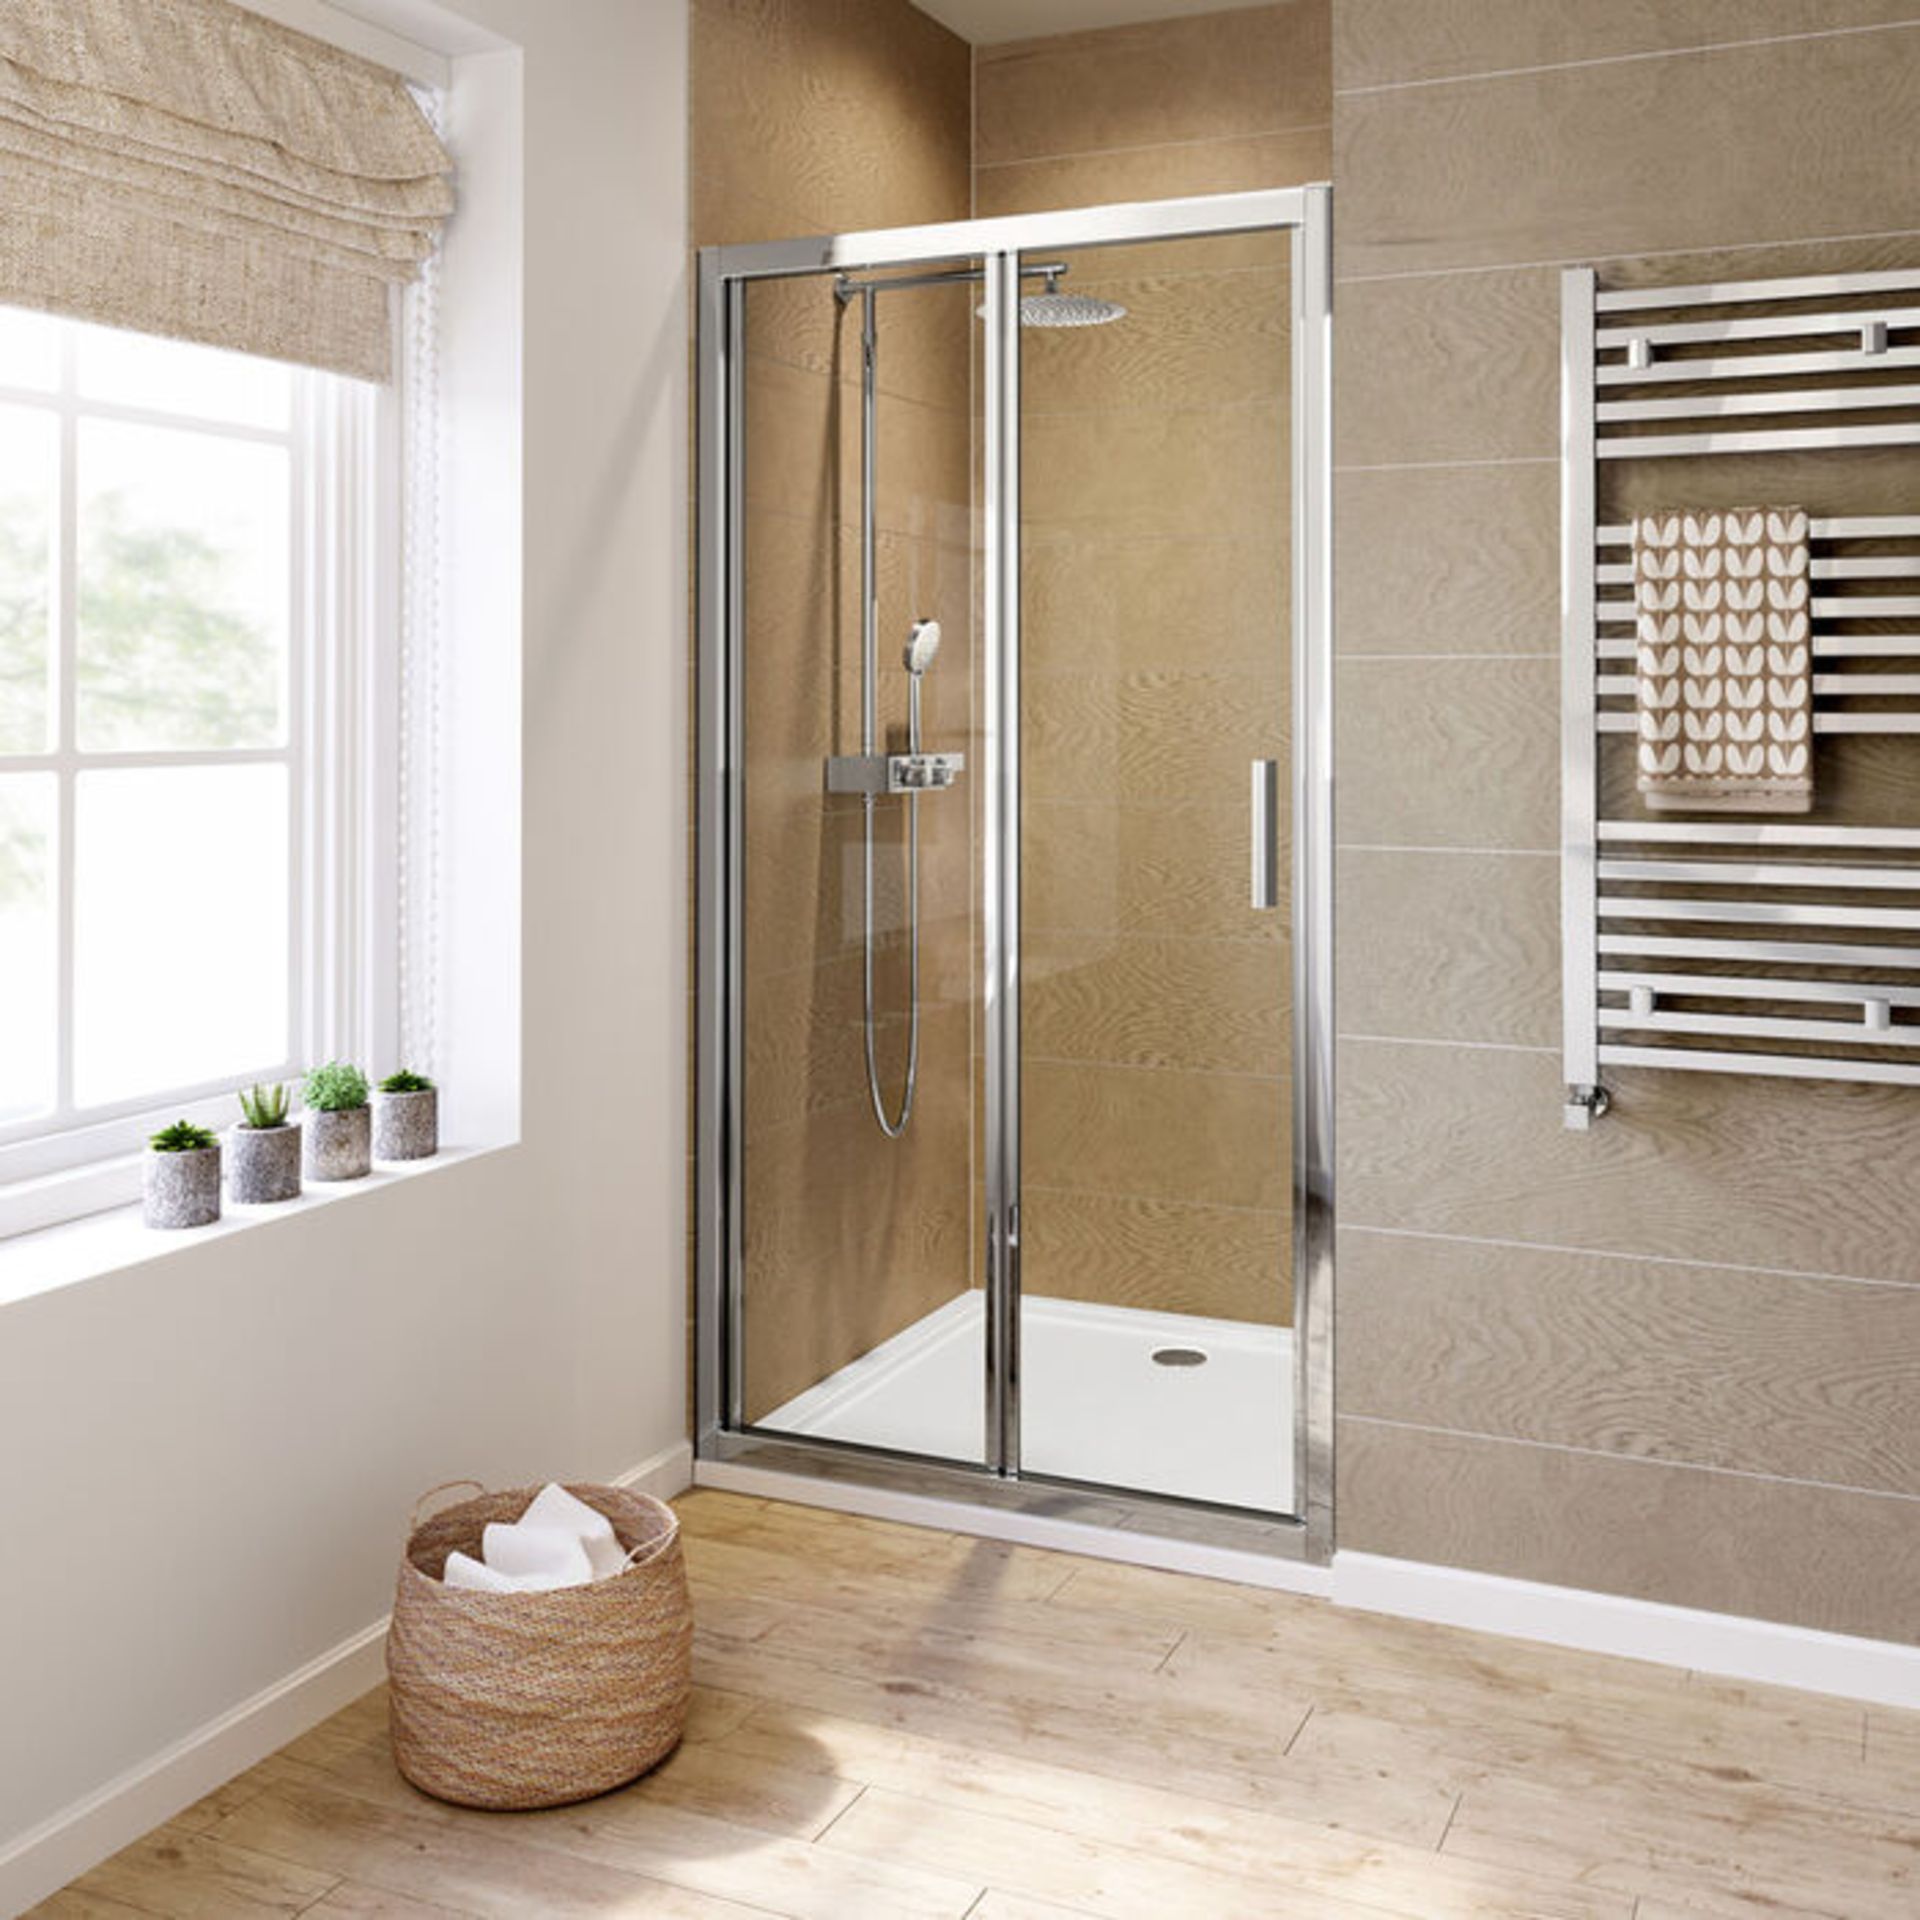 (JF30) 1000mm - 6mm - Elements EasyClean Bifold Shower Door. 6mm Safety Glass - Single-sided Ea... - Image 4 of 4